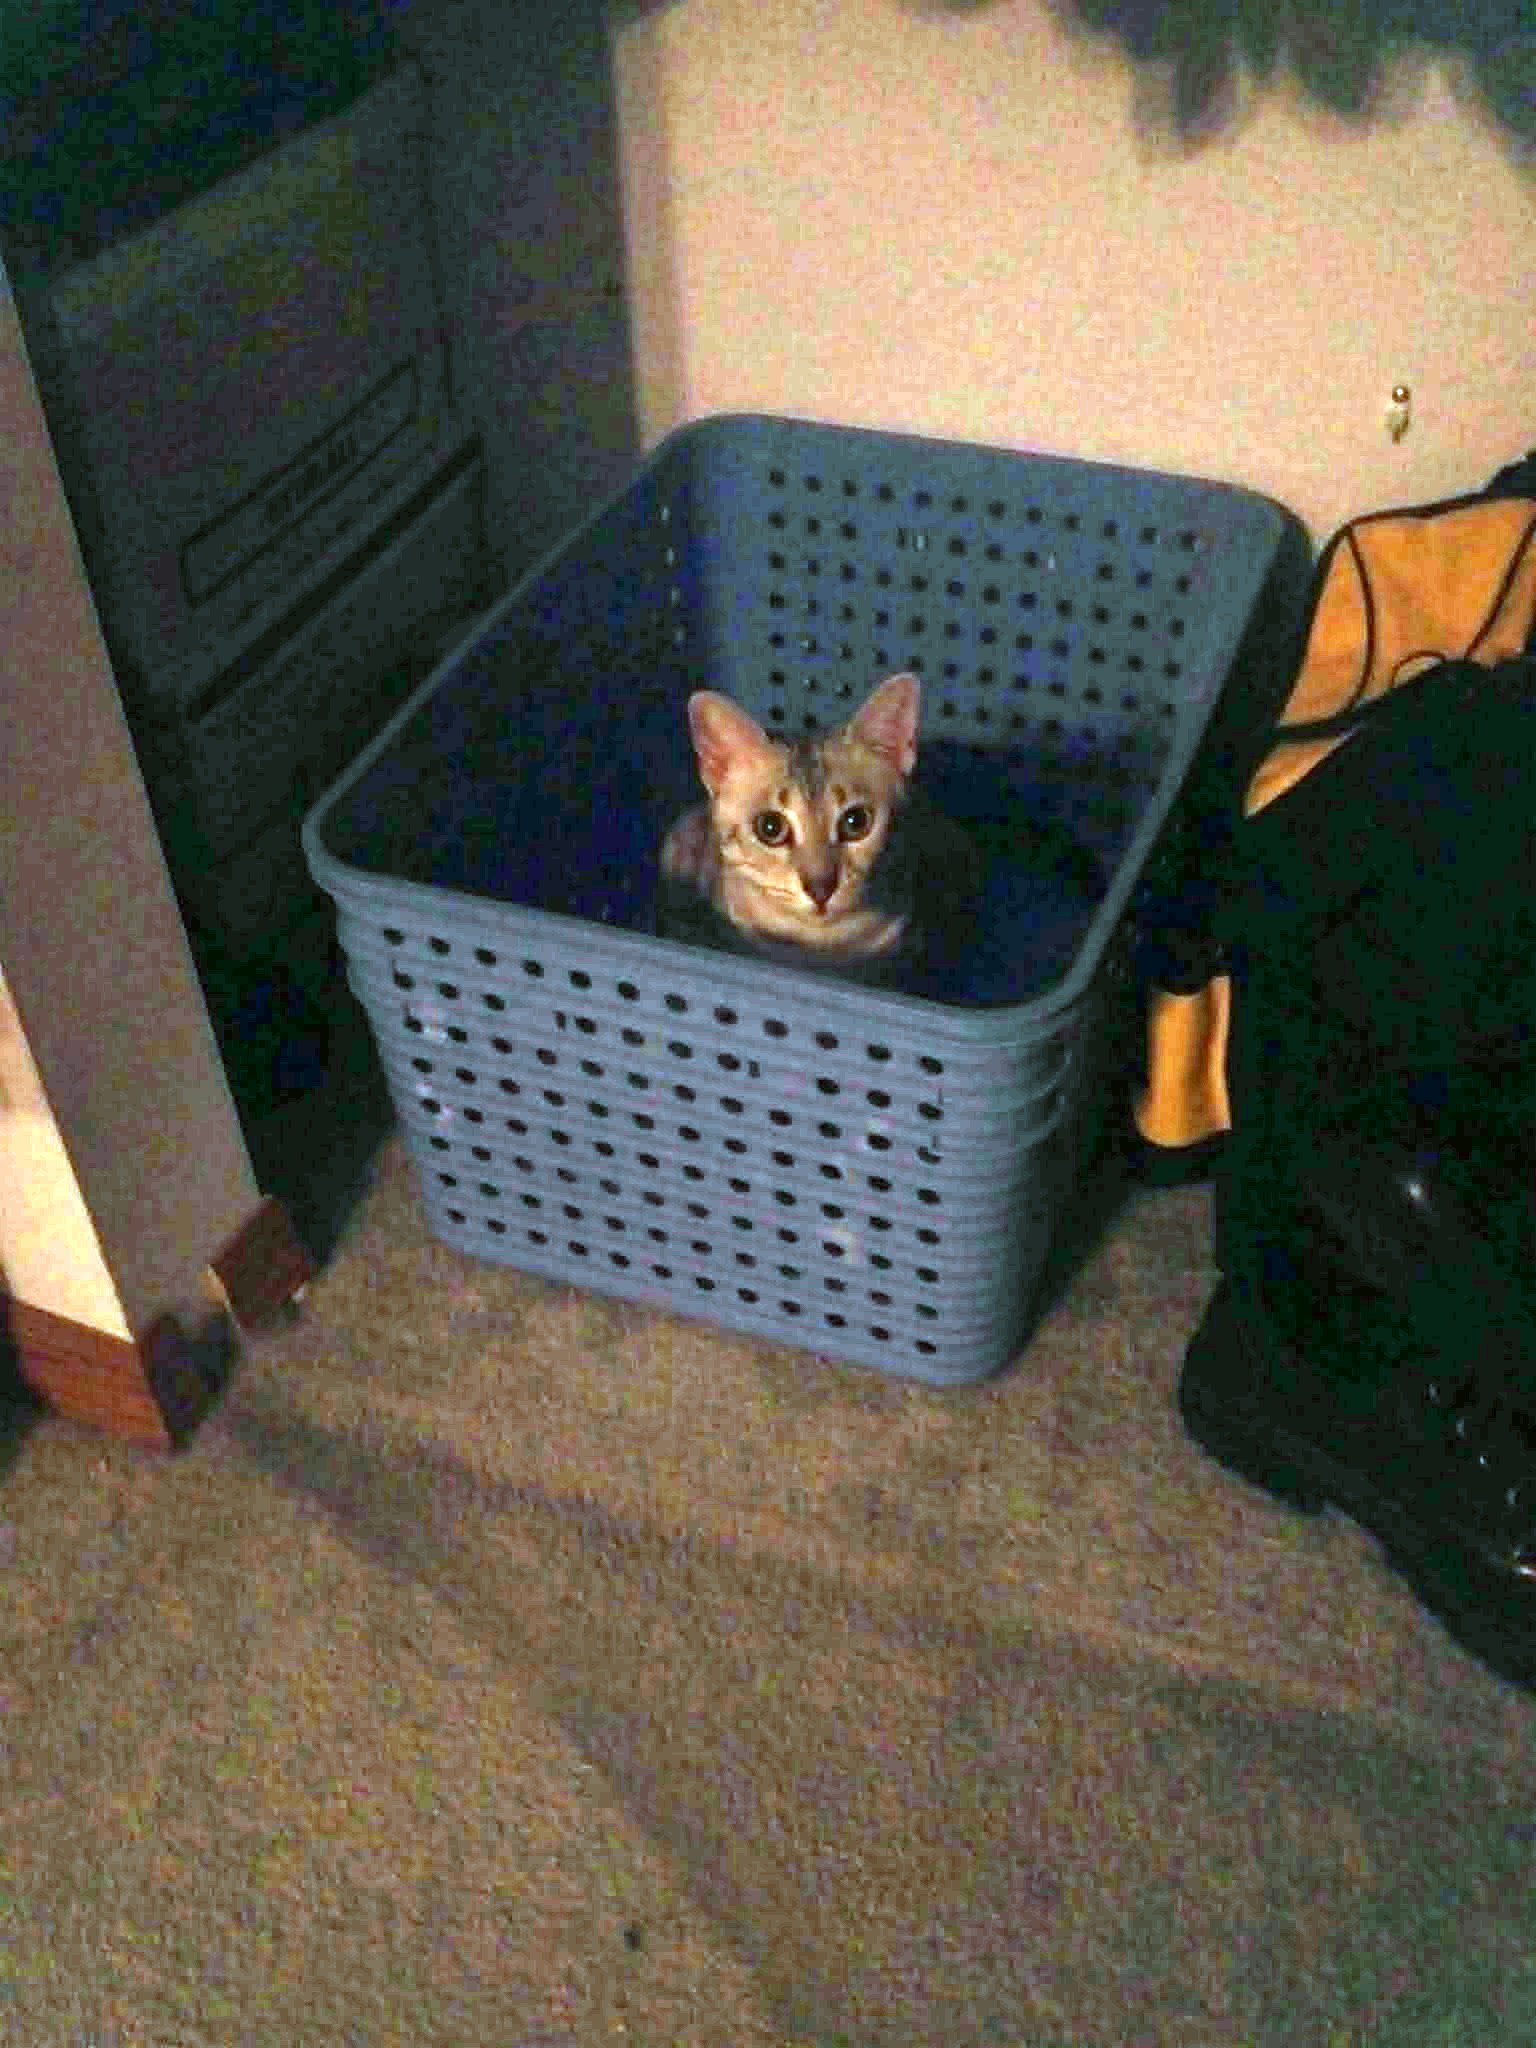 Laundry Cat Waits For More Clothes